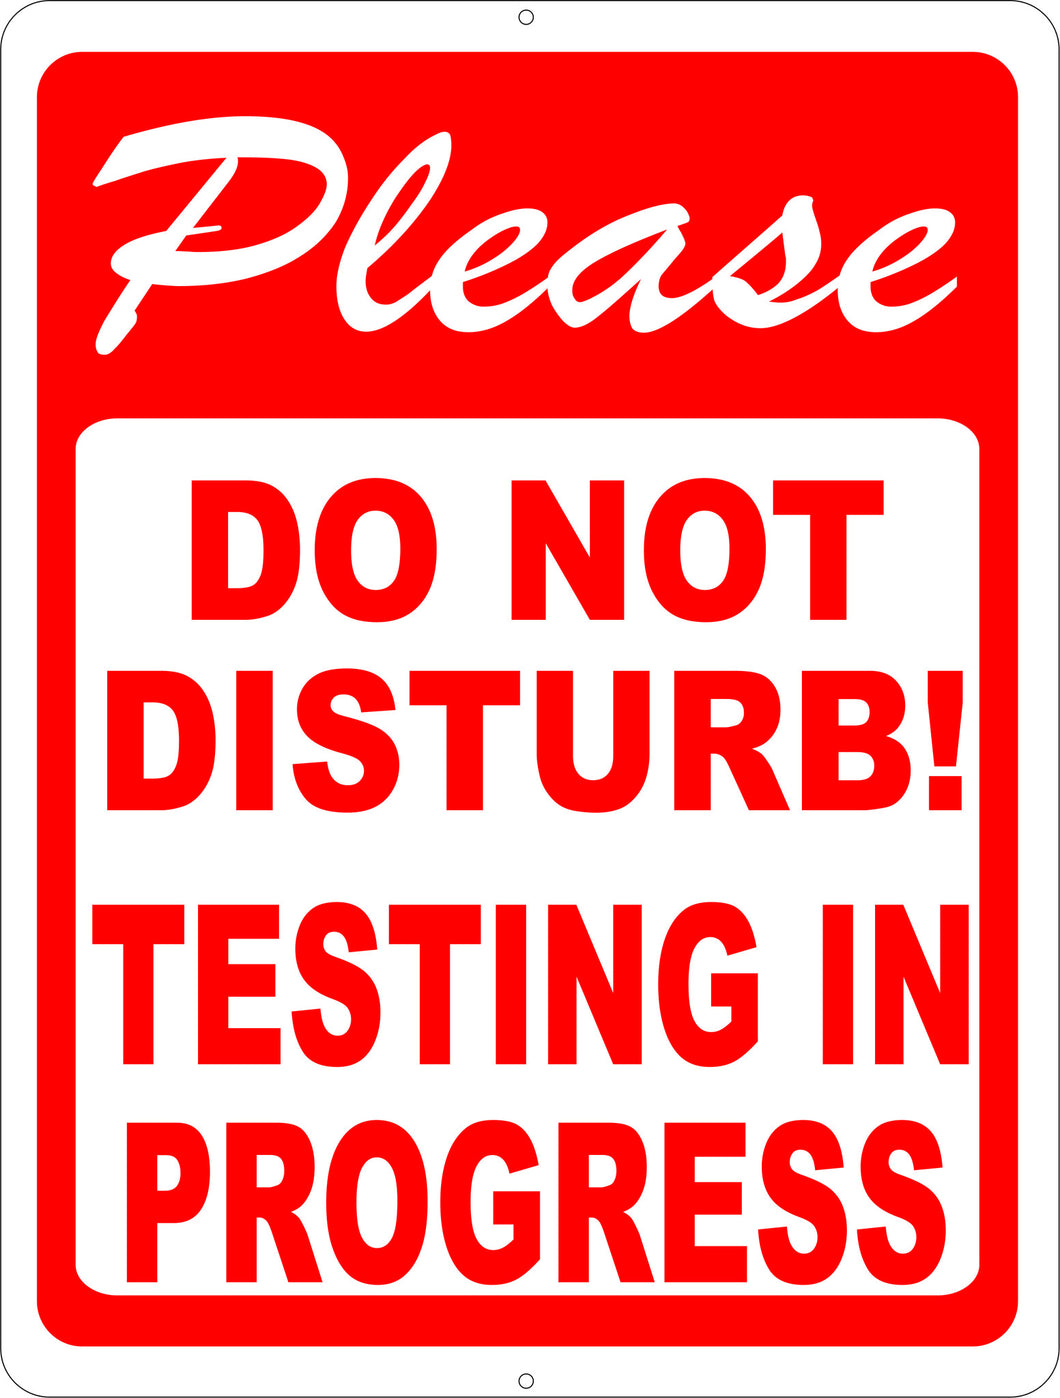 Please Do Not Disturb Testing in Progress Sign - Signs & Decals by SalaGraphics